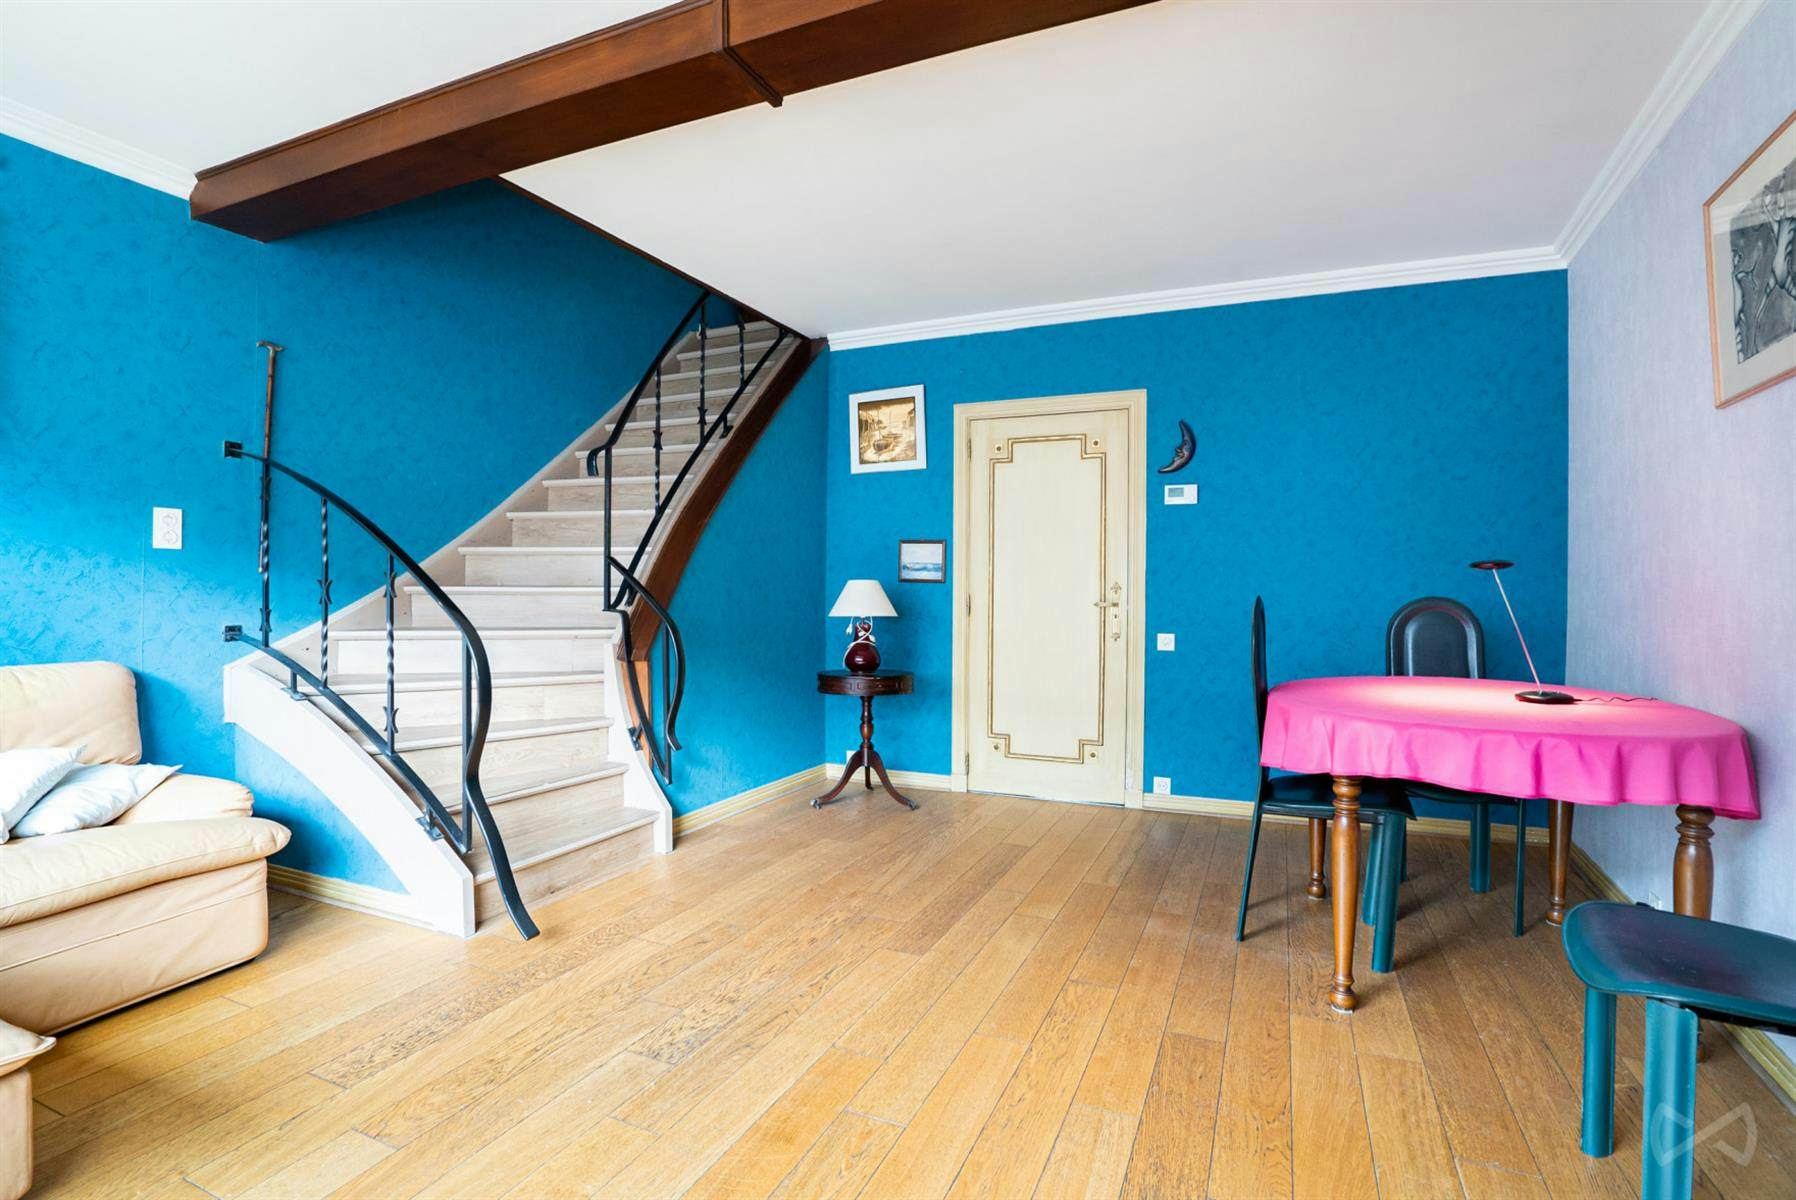 Picture 2 of 4 for Bel-etage with two bedrooms in Braine-le-comte